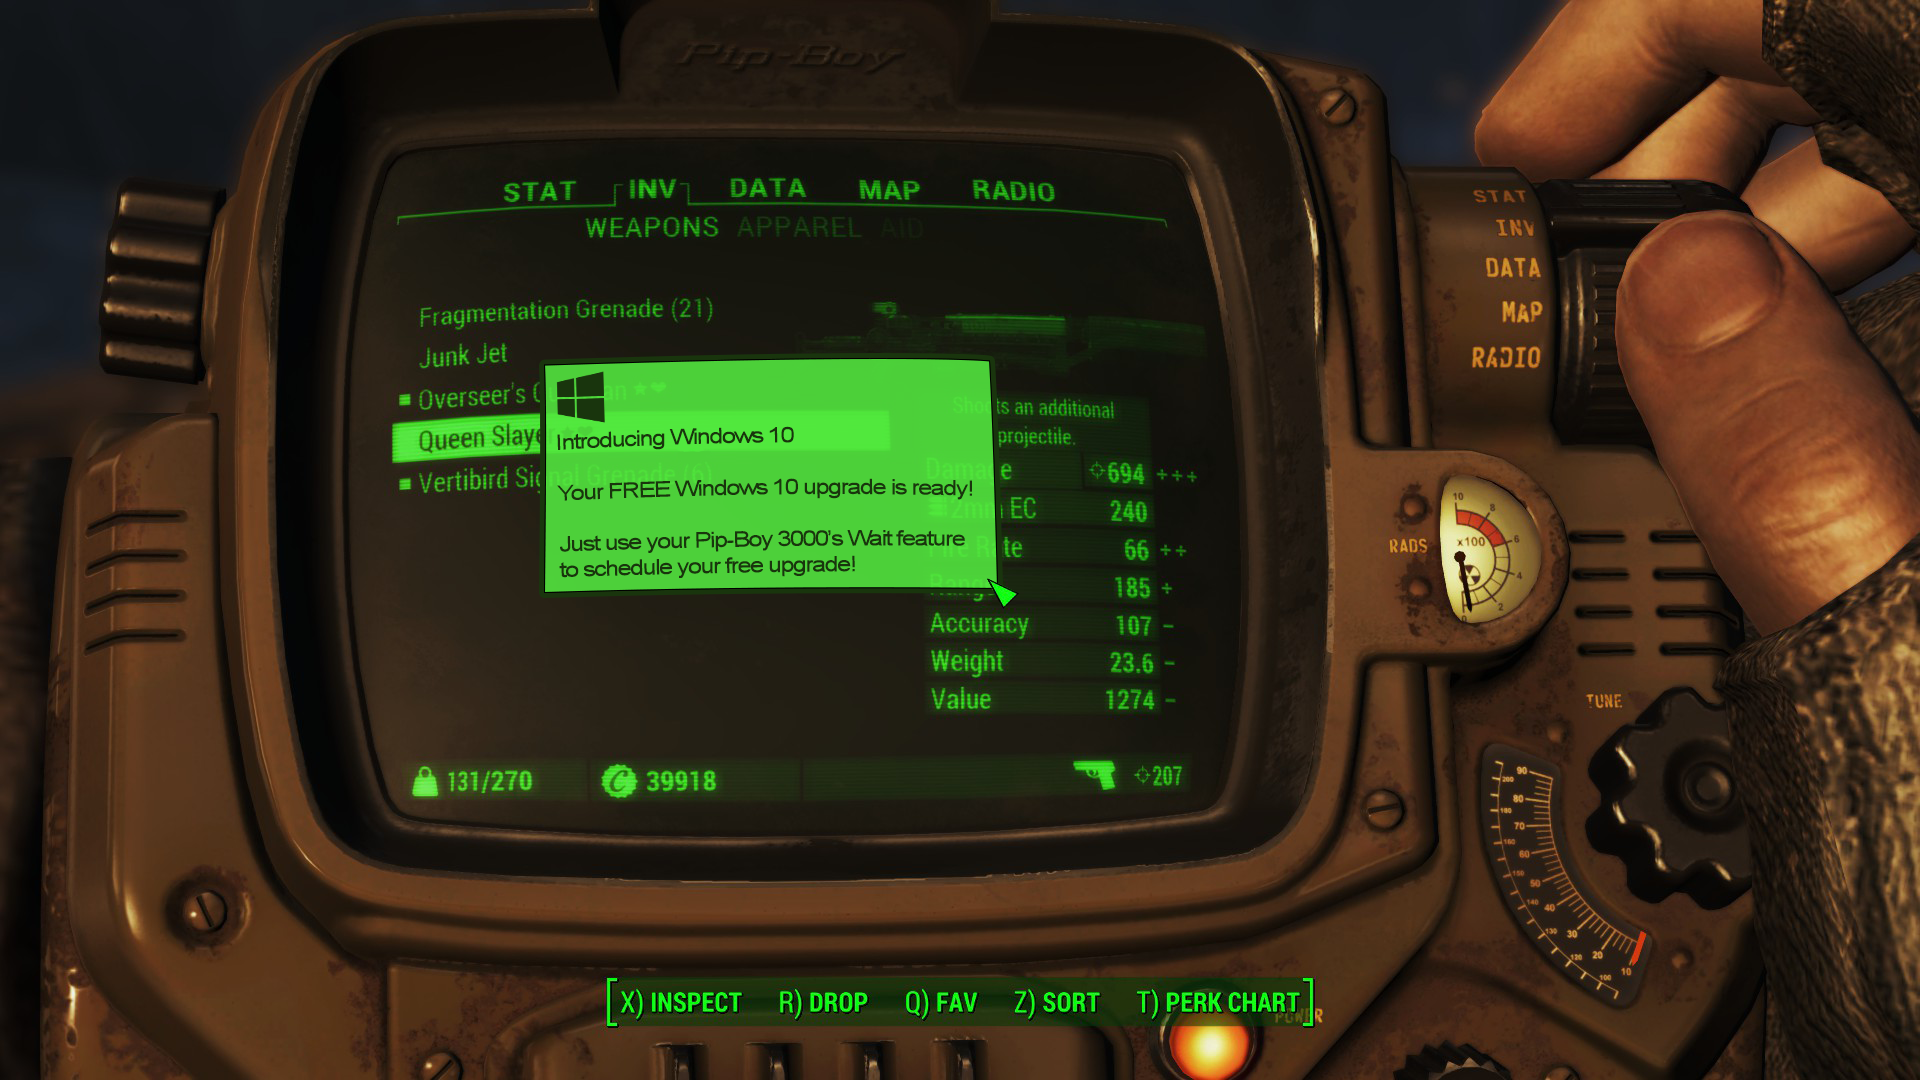 windows 10 pip boy - STAT_INV_DATA Map Weapons Apparel Radio Data Map Radio Fragmentation Grenade 20 Junk je! Overseer Queen Slay Introducing Windows 10 Verbind Sie Your Free Windows 10 upgrade is ready des Ec Just use your PipBoy 3000's Wort feature to s